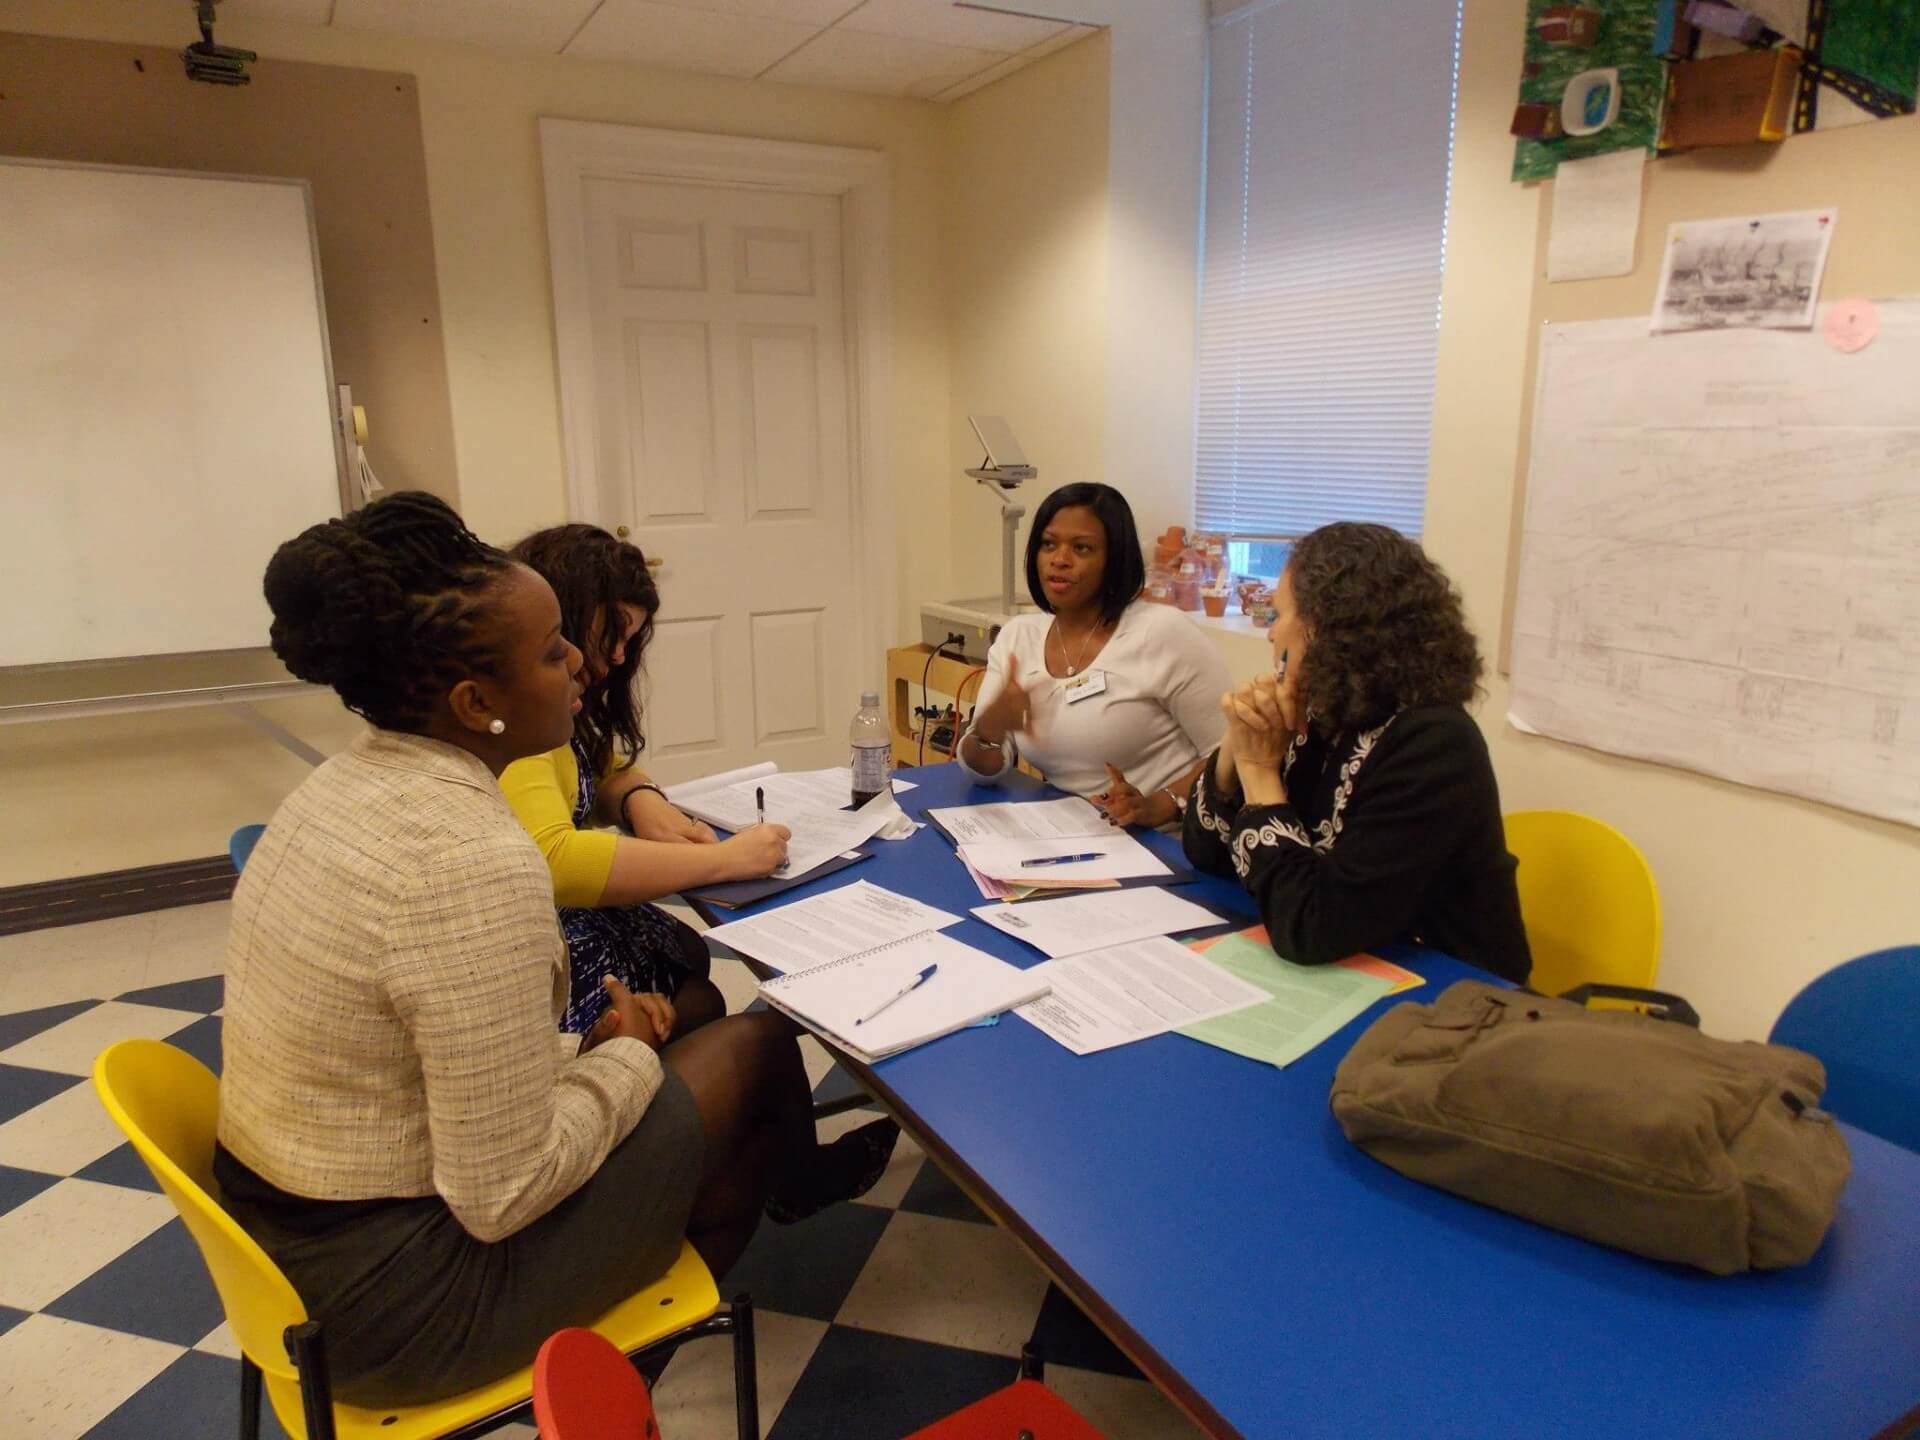 Leadership Newark Serves as Local Think Tank For Greater Newark Community –  Written By: Laureen Delance, MPA